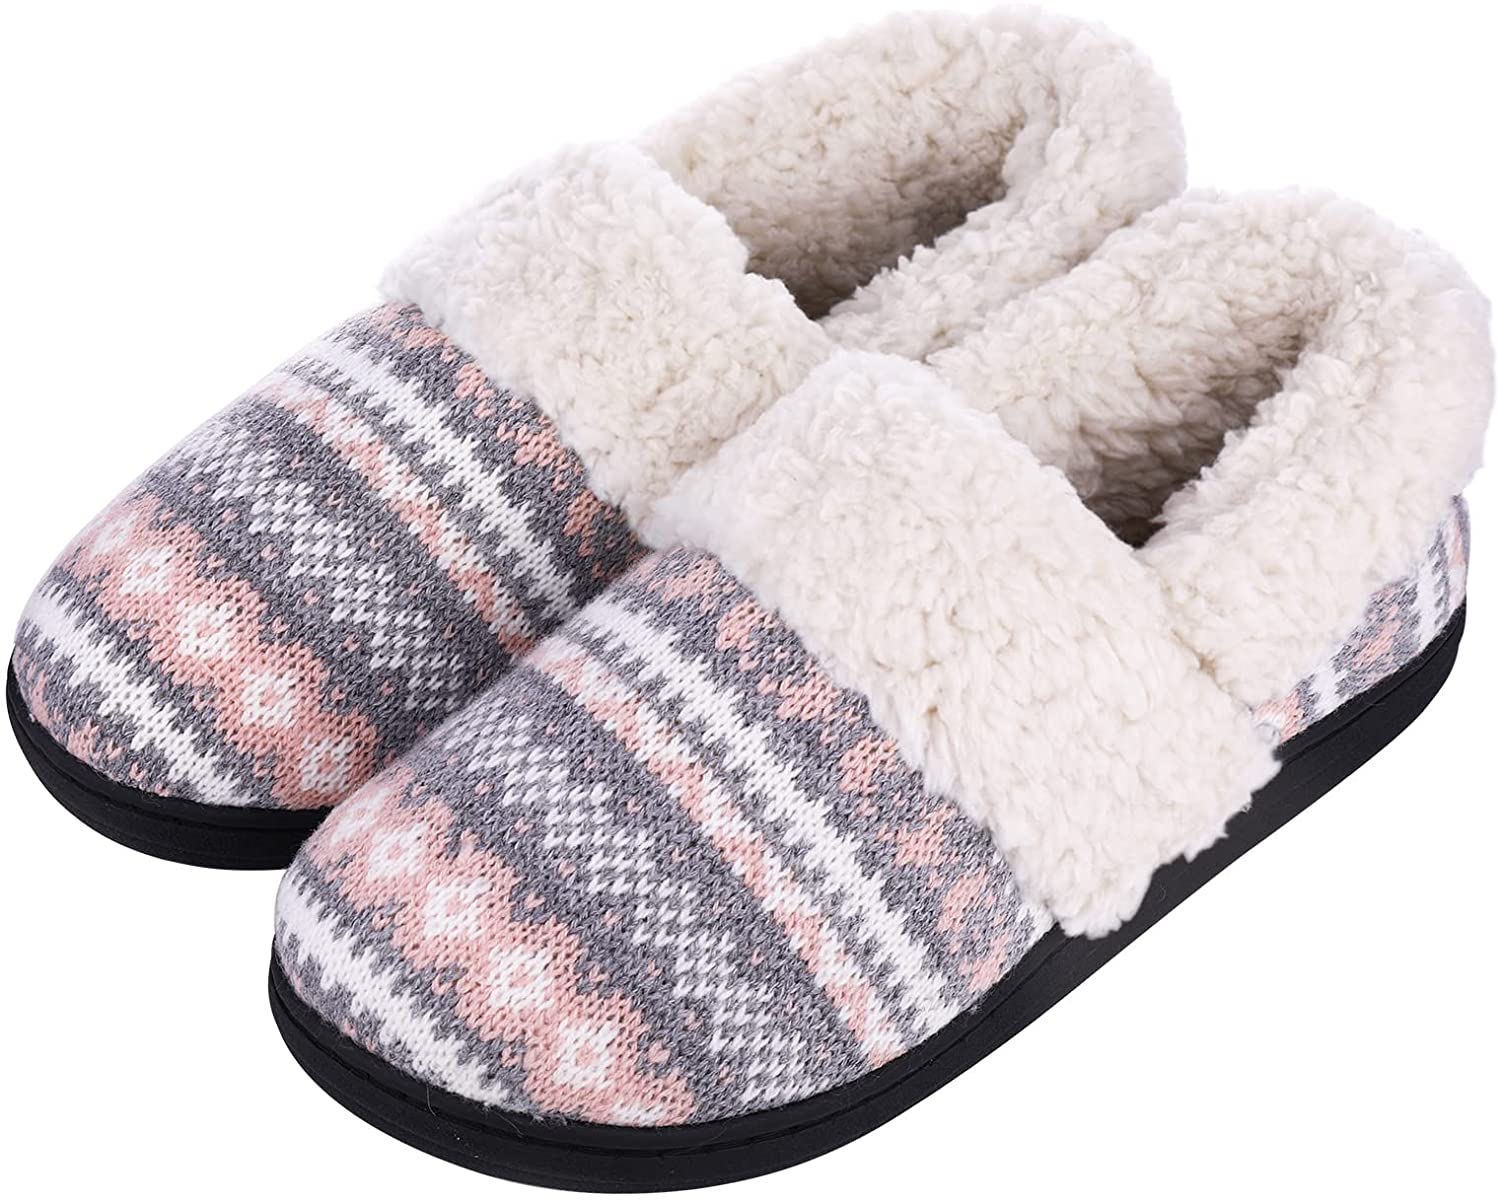 Evshine Women's Knit Memory Foam House Slippers Fuzzy Wool-Like Plush Fleece Lined House Shoes for Indoor & Outdoor 